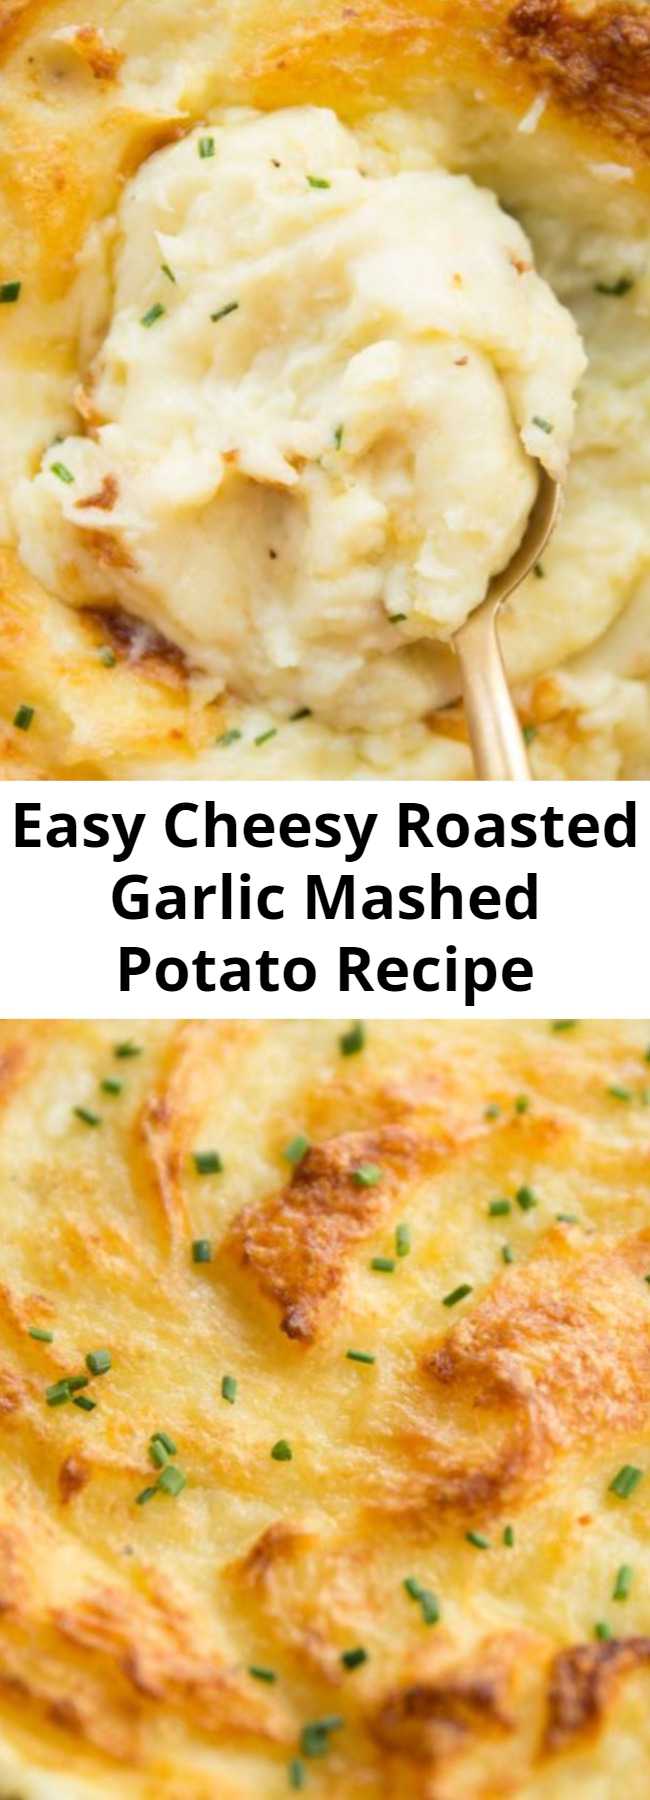 Easy Cheesy Roasted Garlic Mashed Potato Recipe - This Roasted Garlic Mashed Potato is loaded with Butter, Cream and Cheese, then baked in the oven until ultra crisp on top and gooey underneath. #cheese #cheesy #potato #mashedpotatoes #roastedgarlic #garlicpotatoes